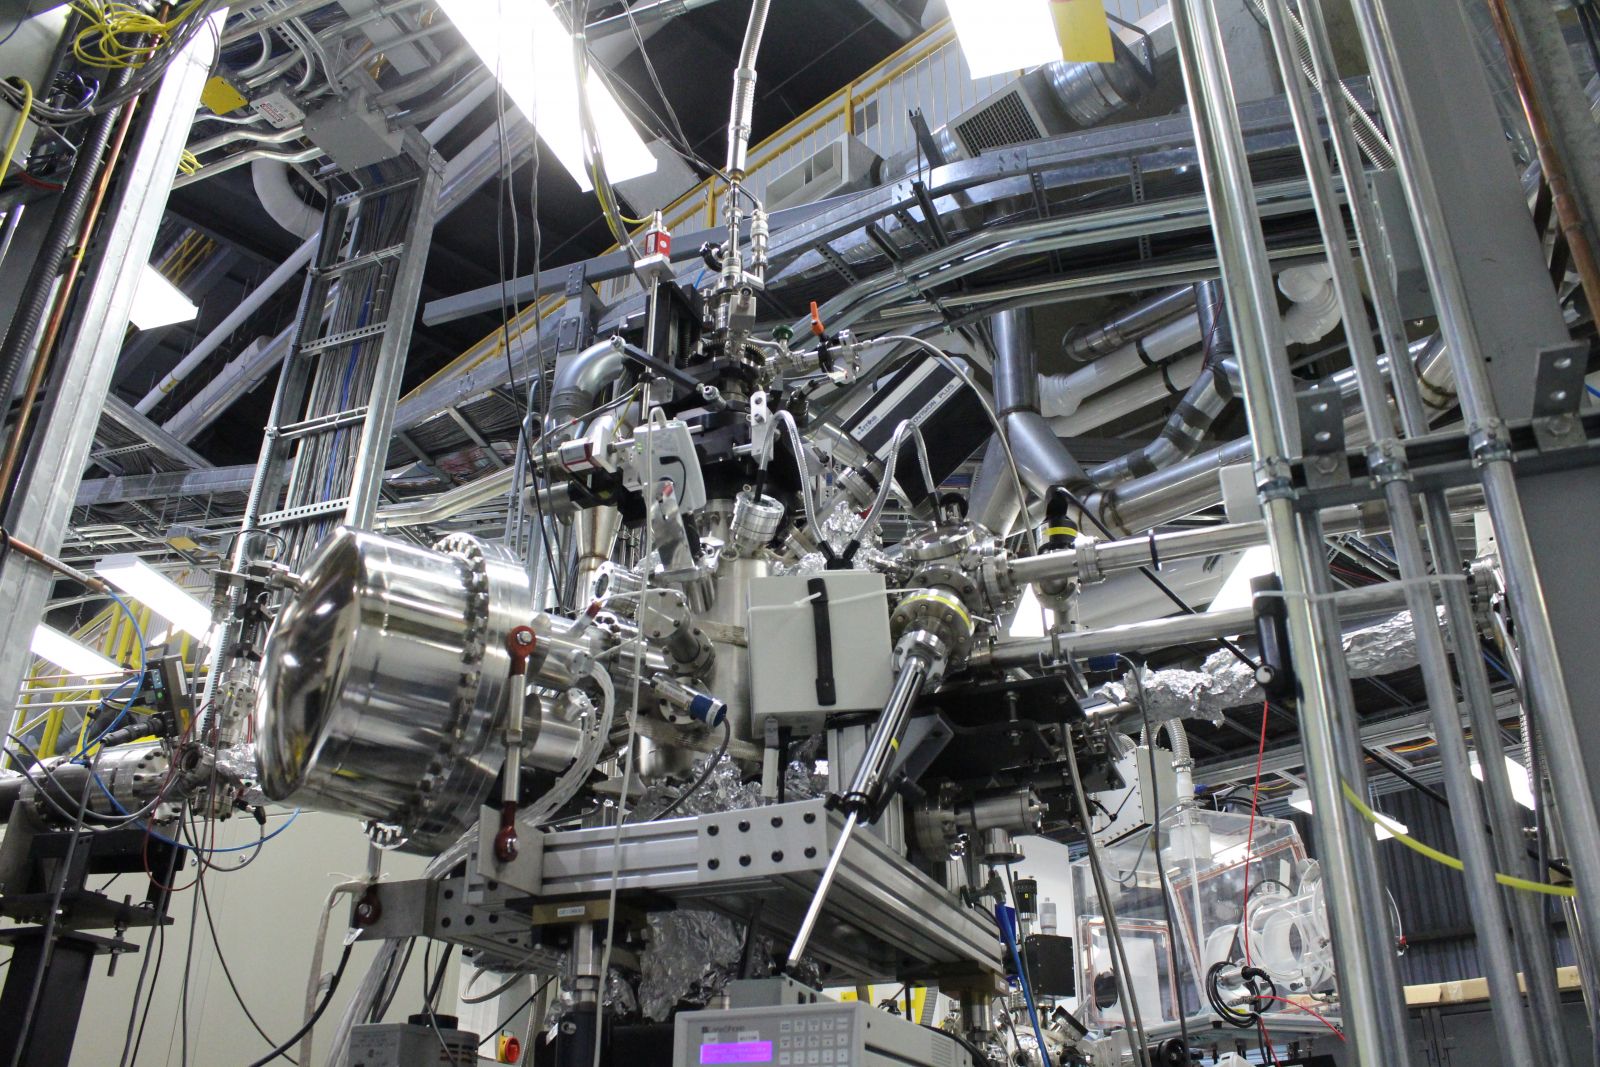 The researchers used the SGM beamline at the CLS (pictured) to see how the chemistry in the nitrogen changed as it adsorbed ammonia and how well their material could make nitrogen available to plants if it was used as a fertilizer.  